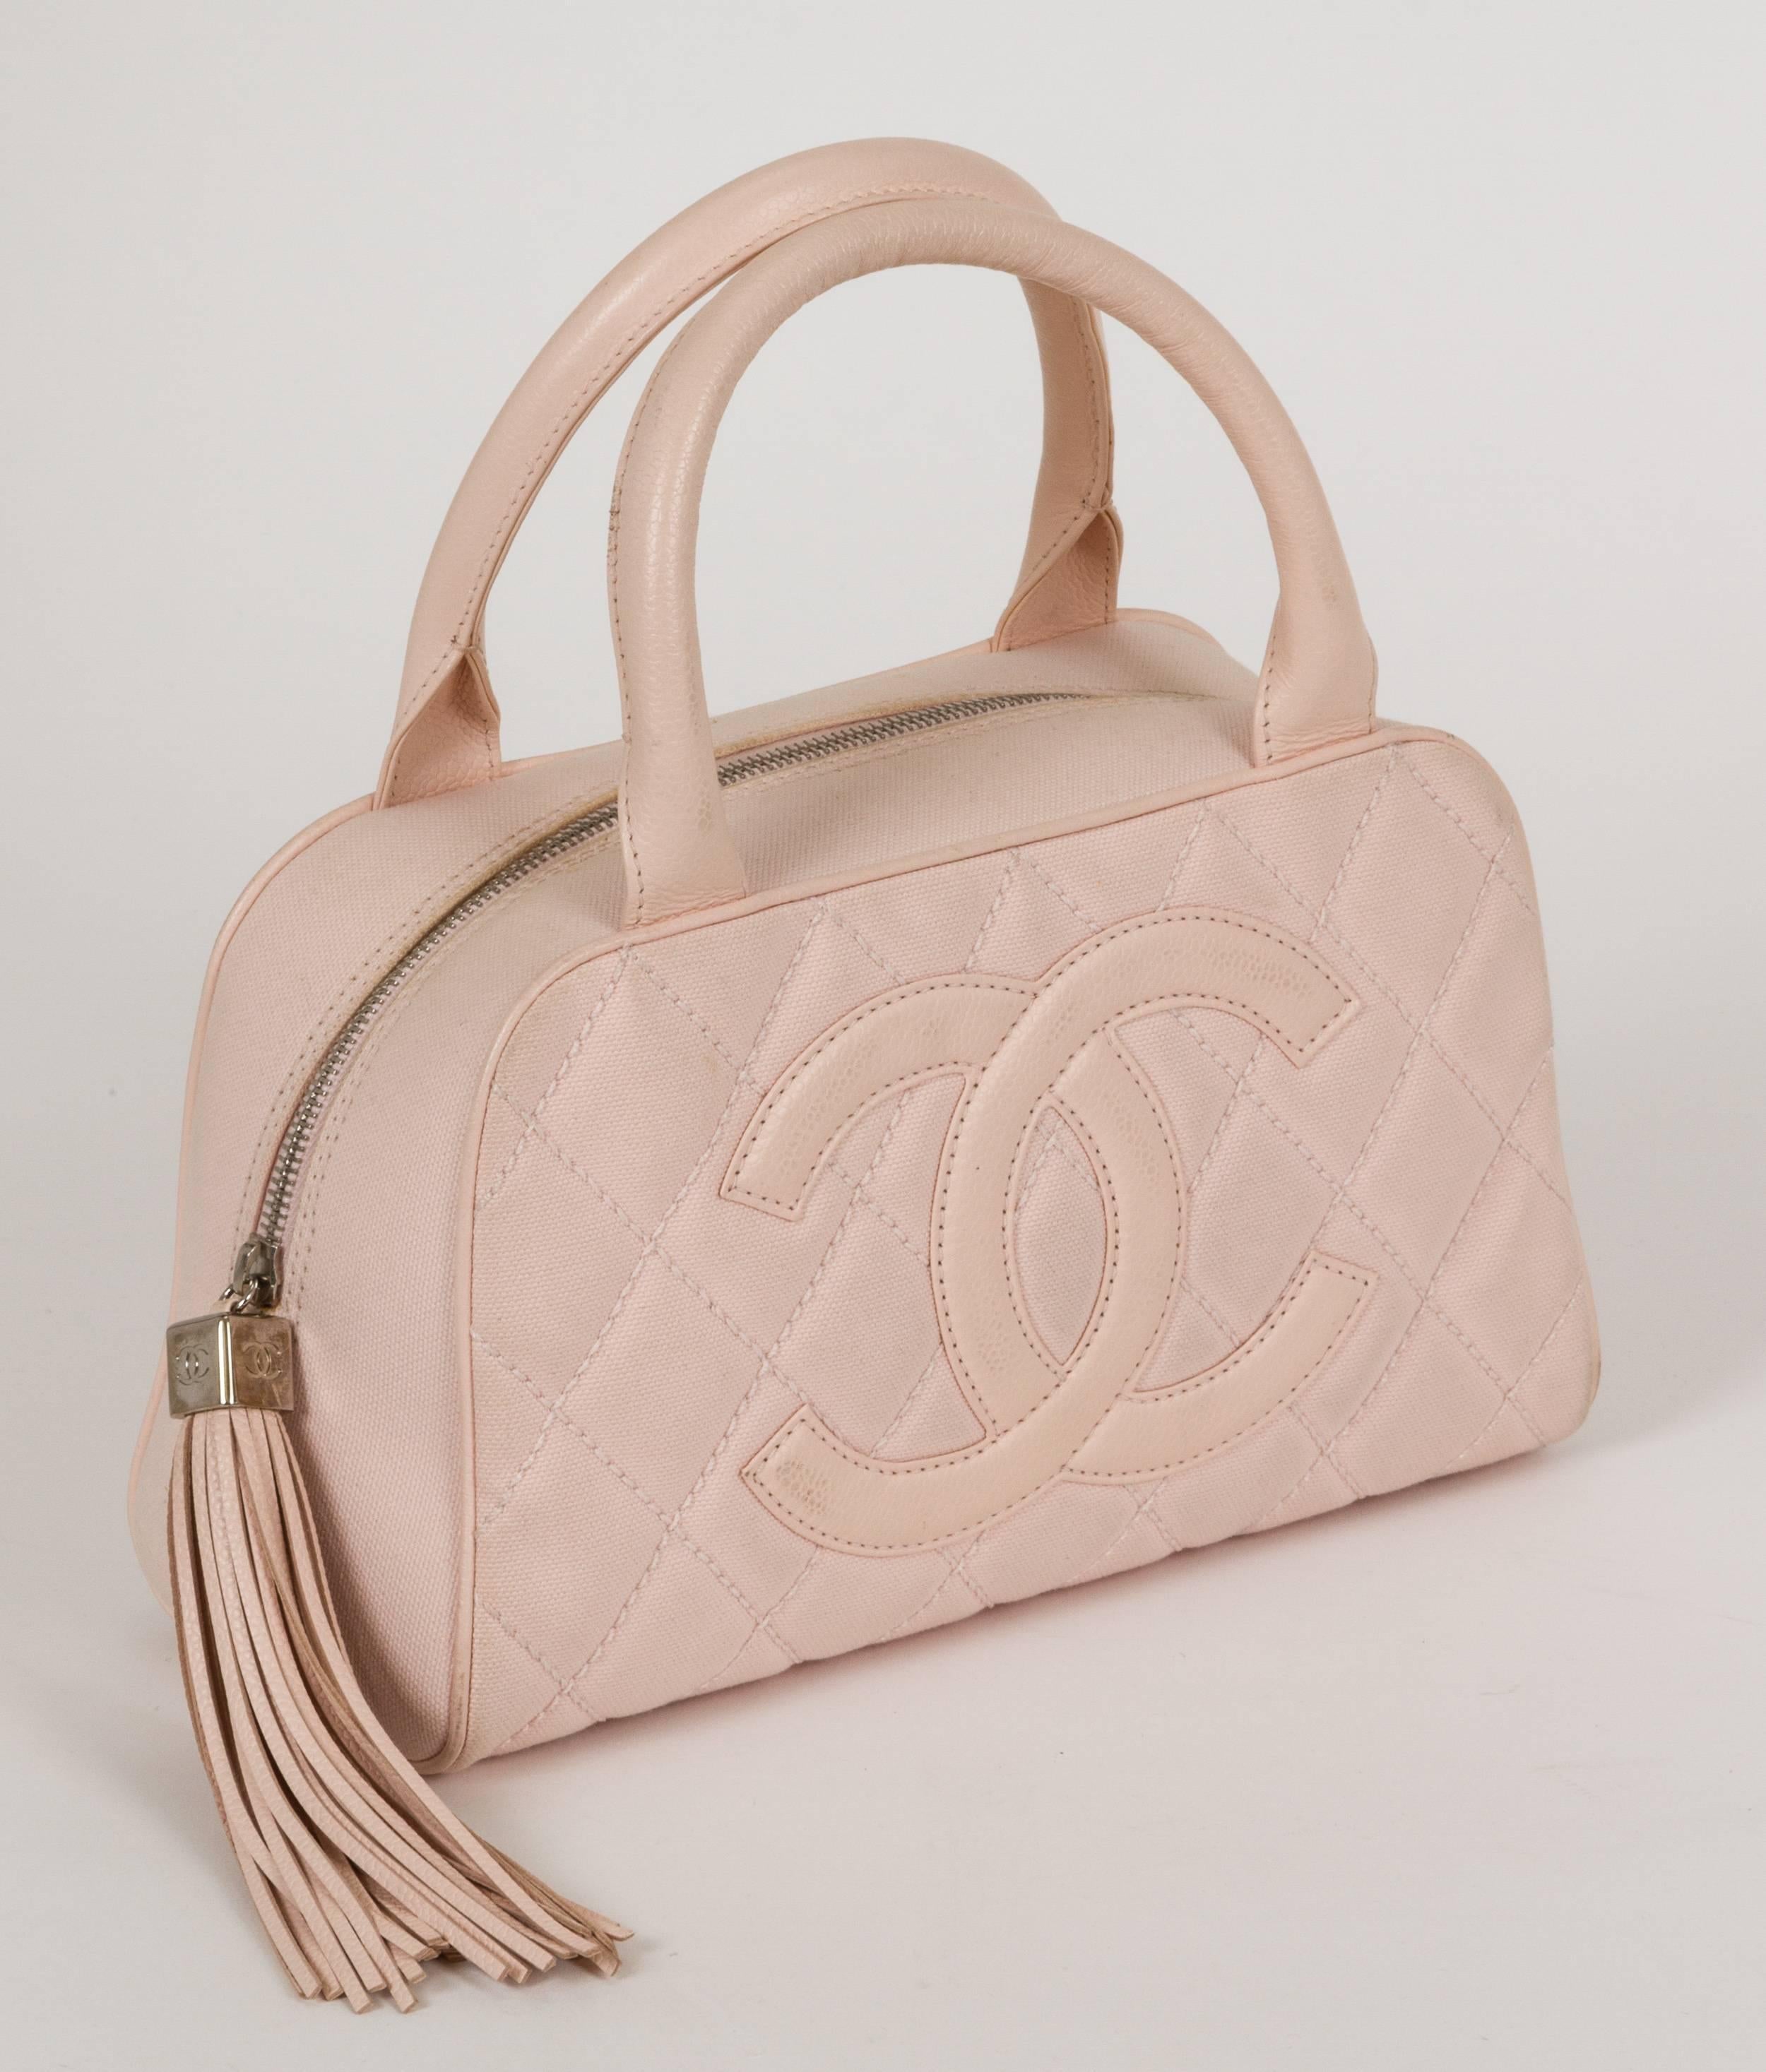 Late-1990s Chanel light-pink bowler. Combination of fabric and leather. Very good condition with two minor stains barely visible. Comes with seal and original dust bag.
